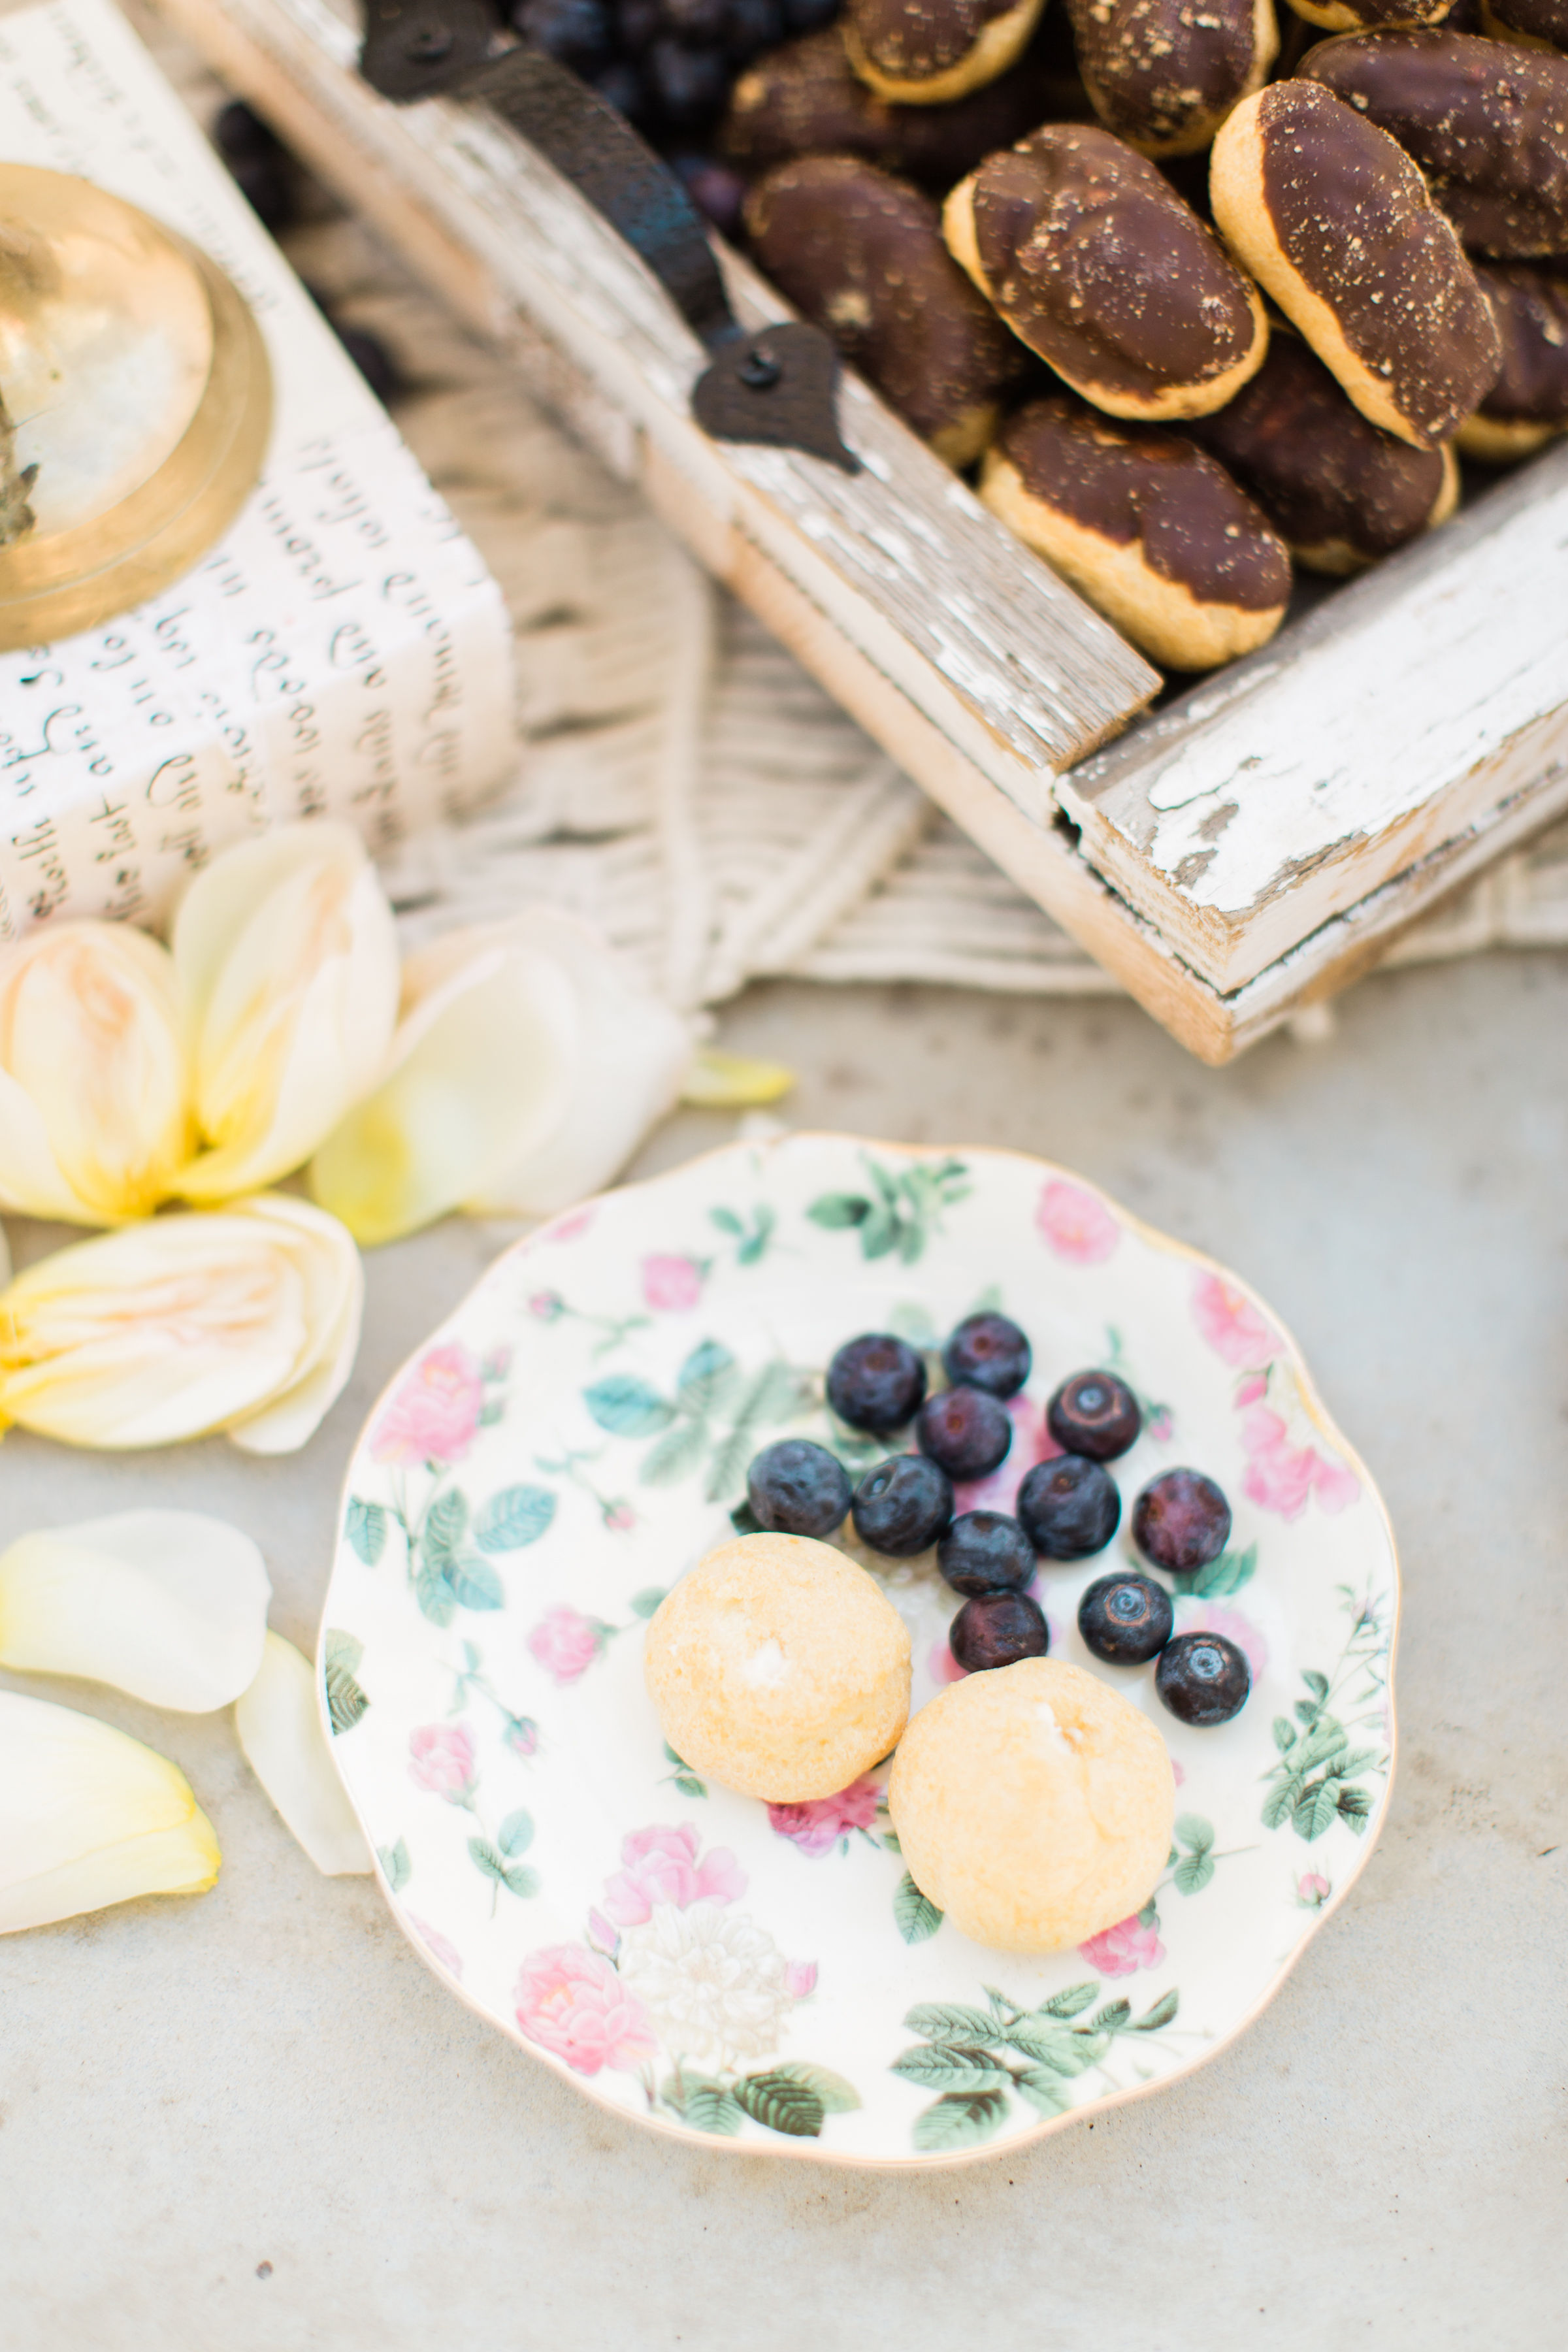 Welcome the sunshine with a whimsical outdoor spring tea and dessert party, complete with the easiest foolproof desserts that will make you hostess with the mostest. | Click through for the details. #teaparty #dessertparty #outdoorparty #spring | glitterinc.com | @glitterinc